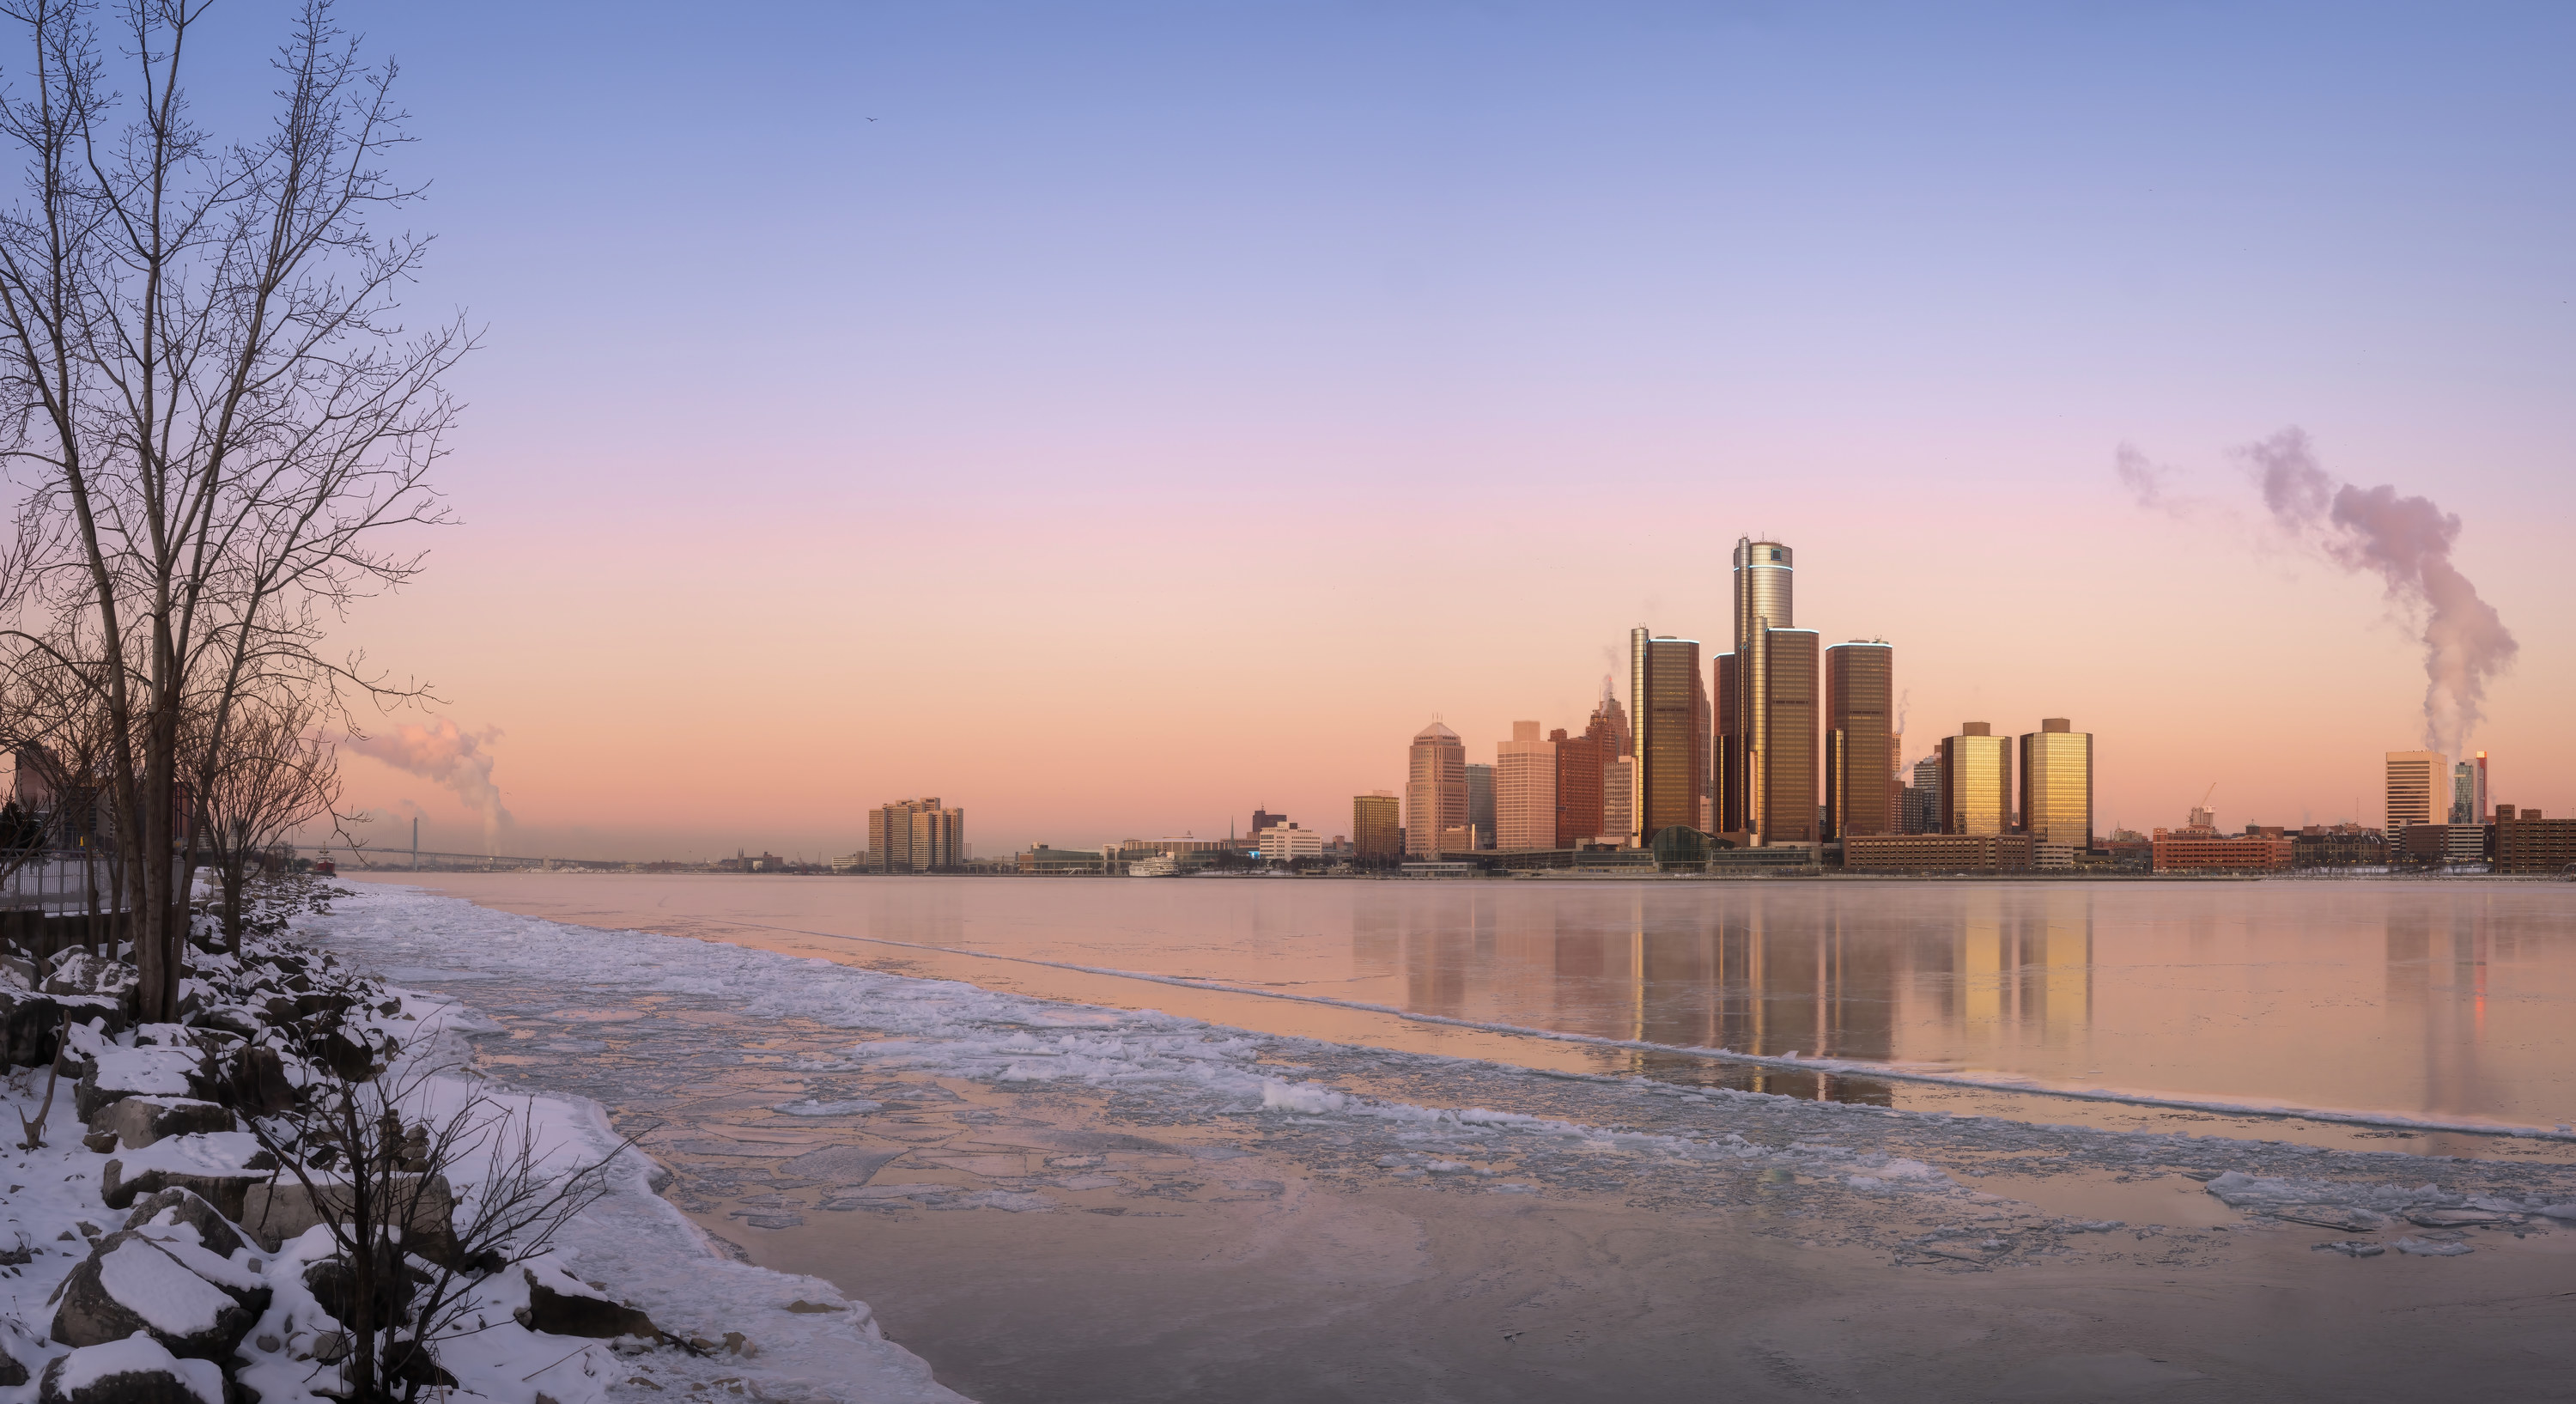 The Detroit, MI skyline as seen from Windsor, Ontario at sunset